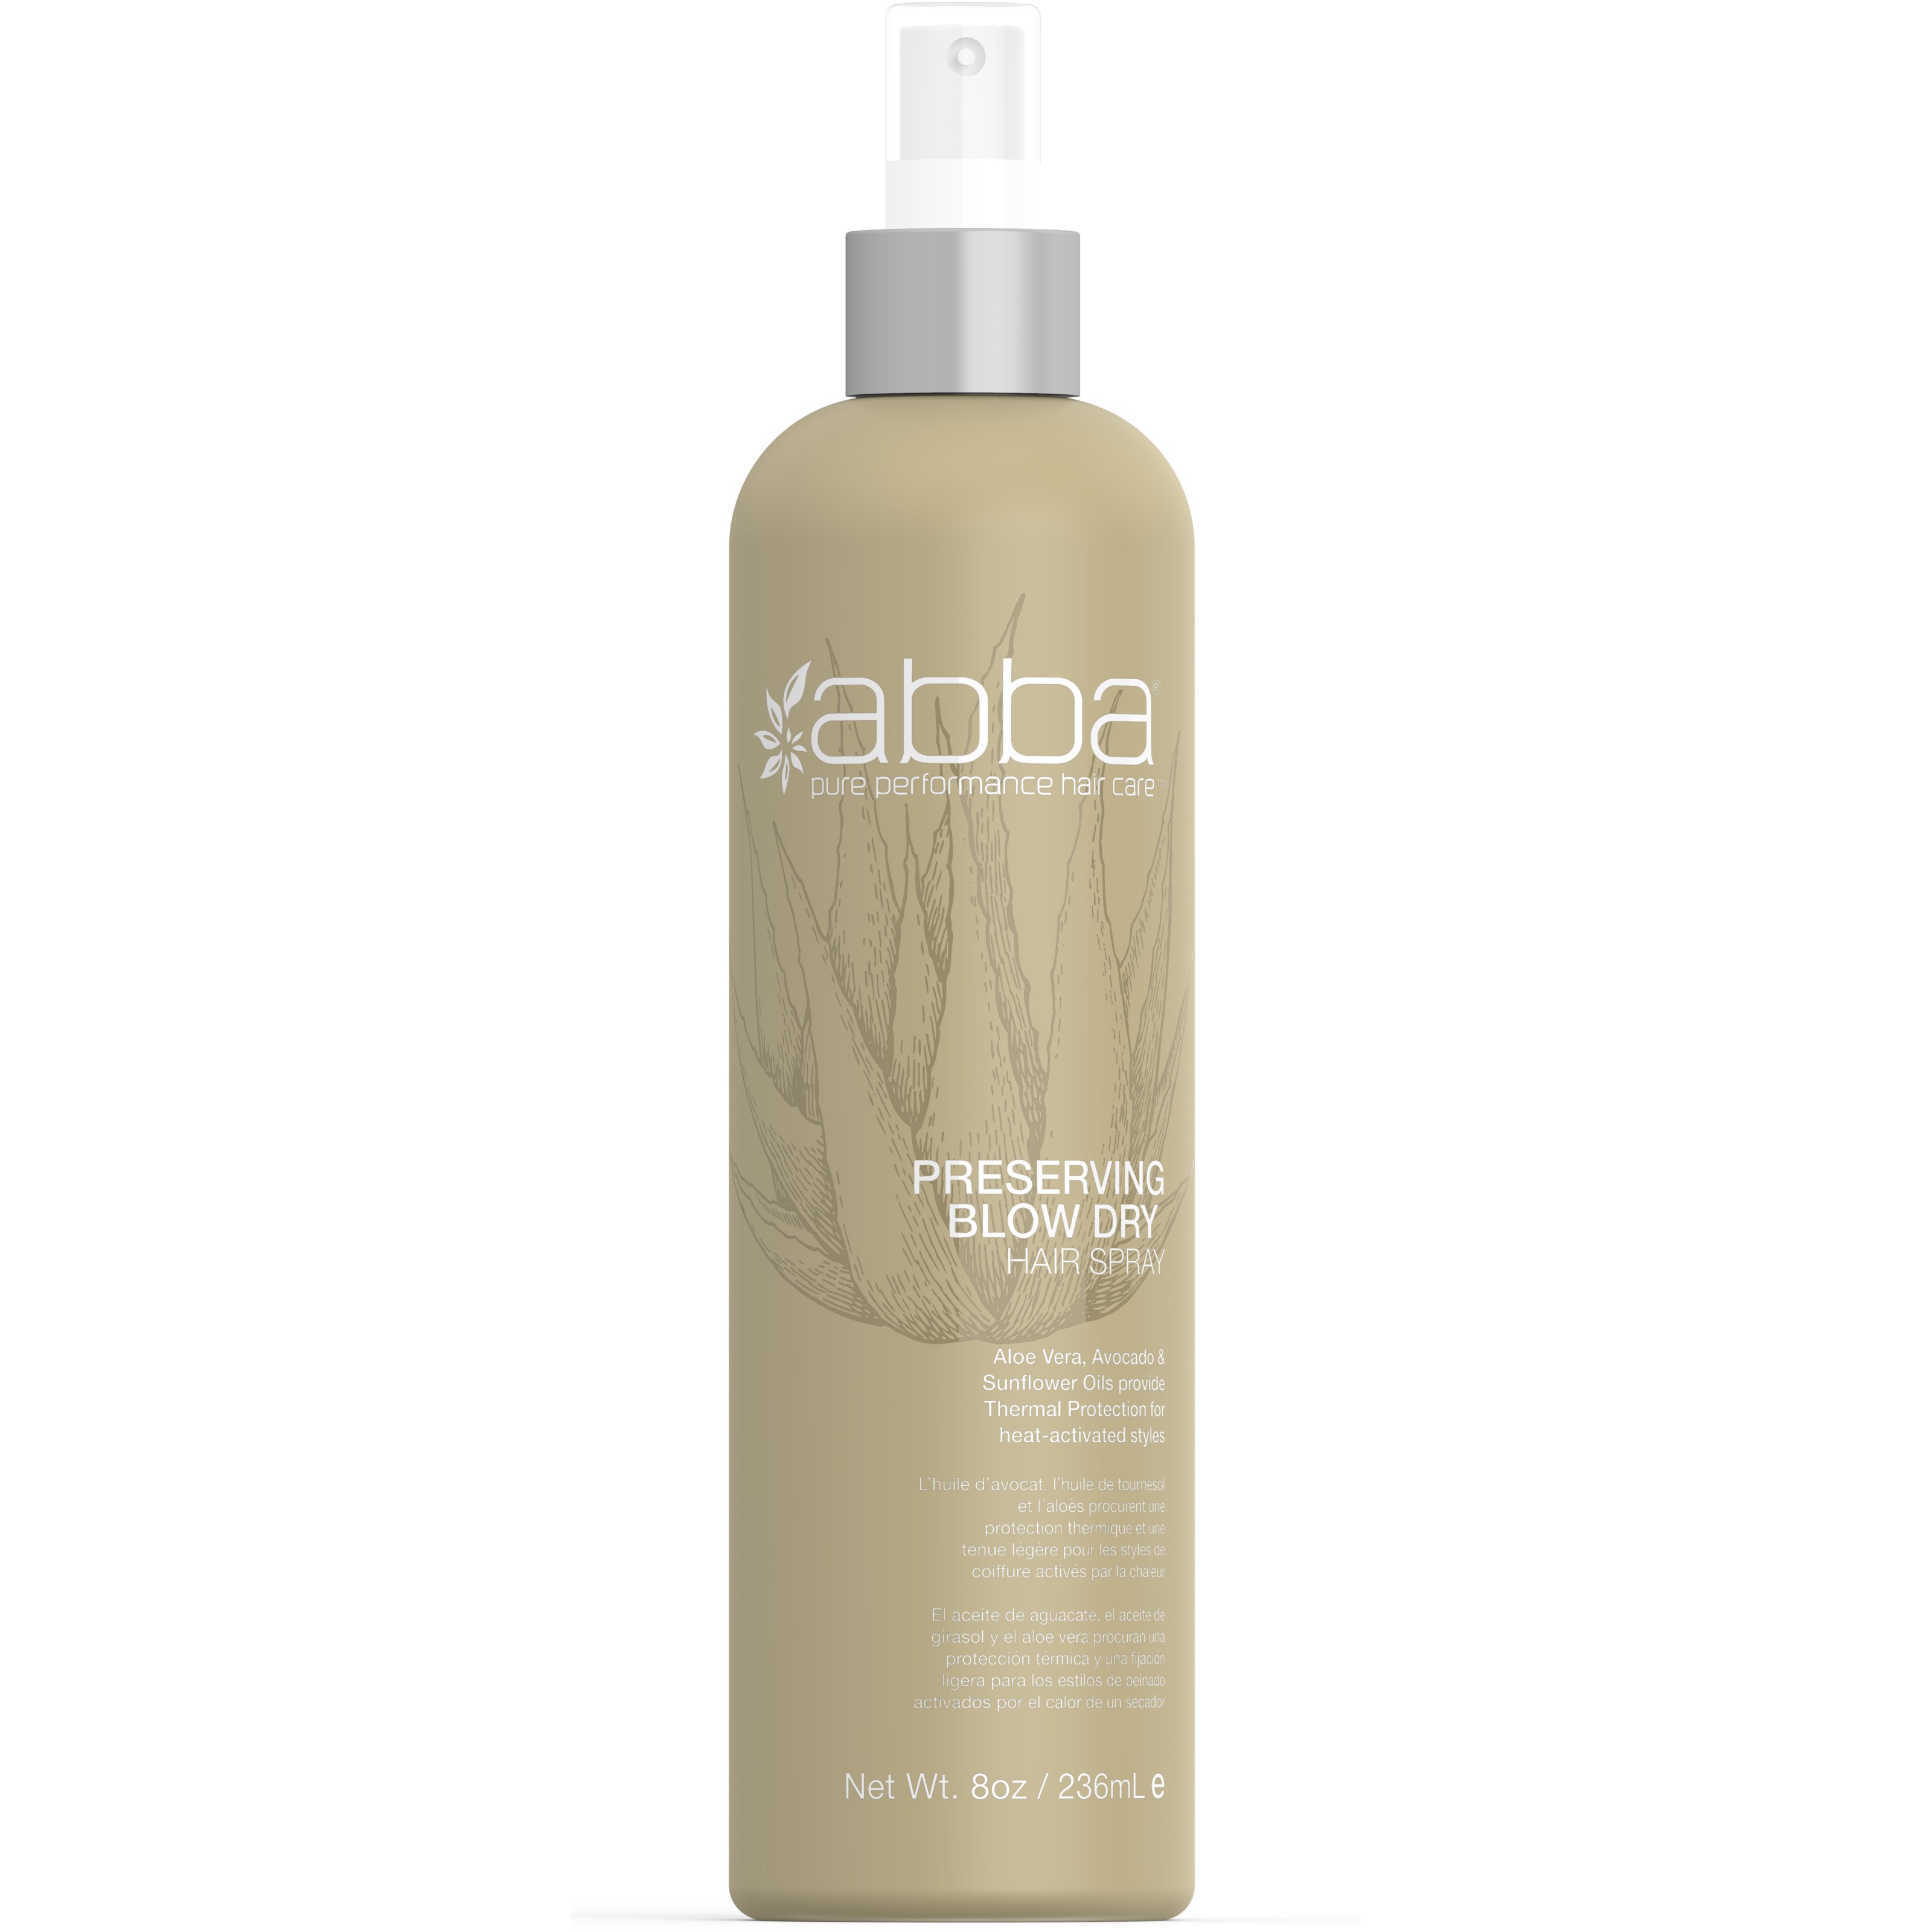 Abba Pure Performace Haircare Preserving Blow Dry Spray 236 ml